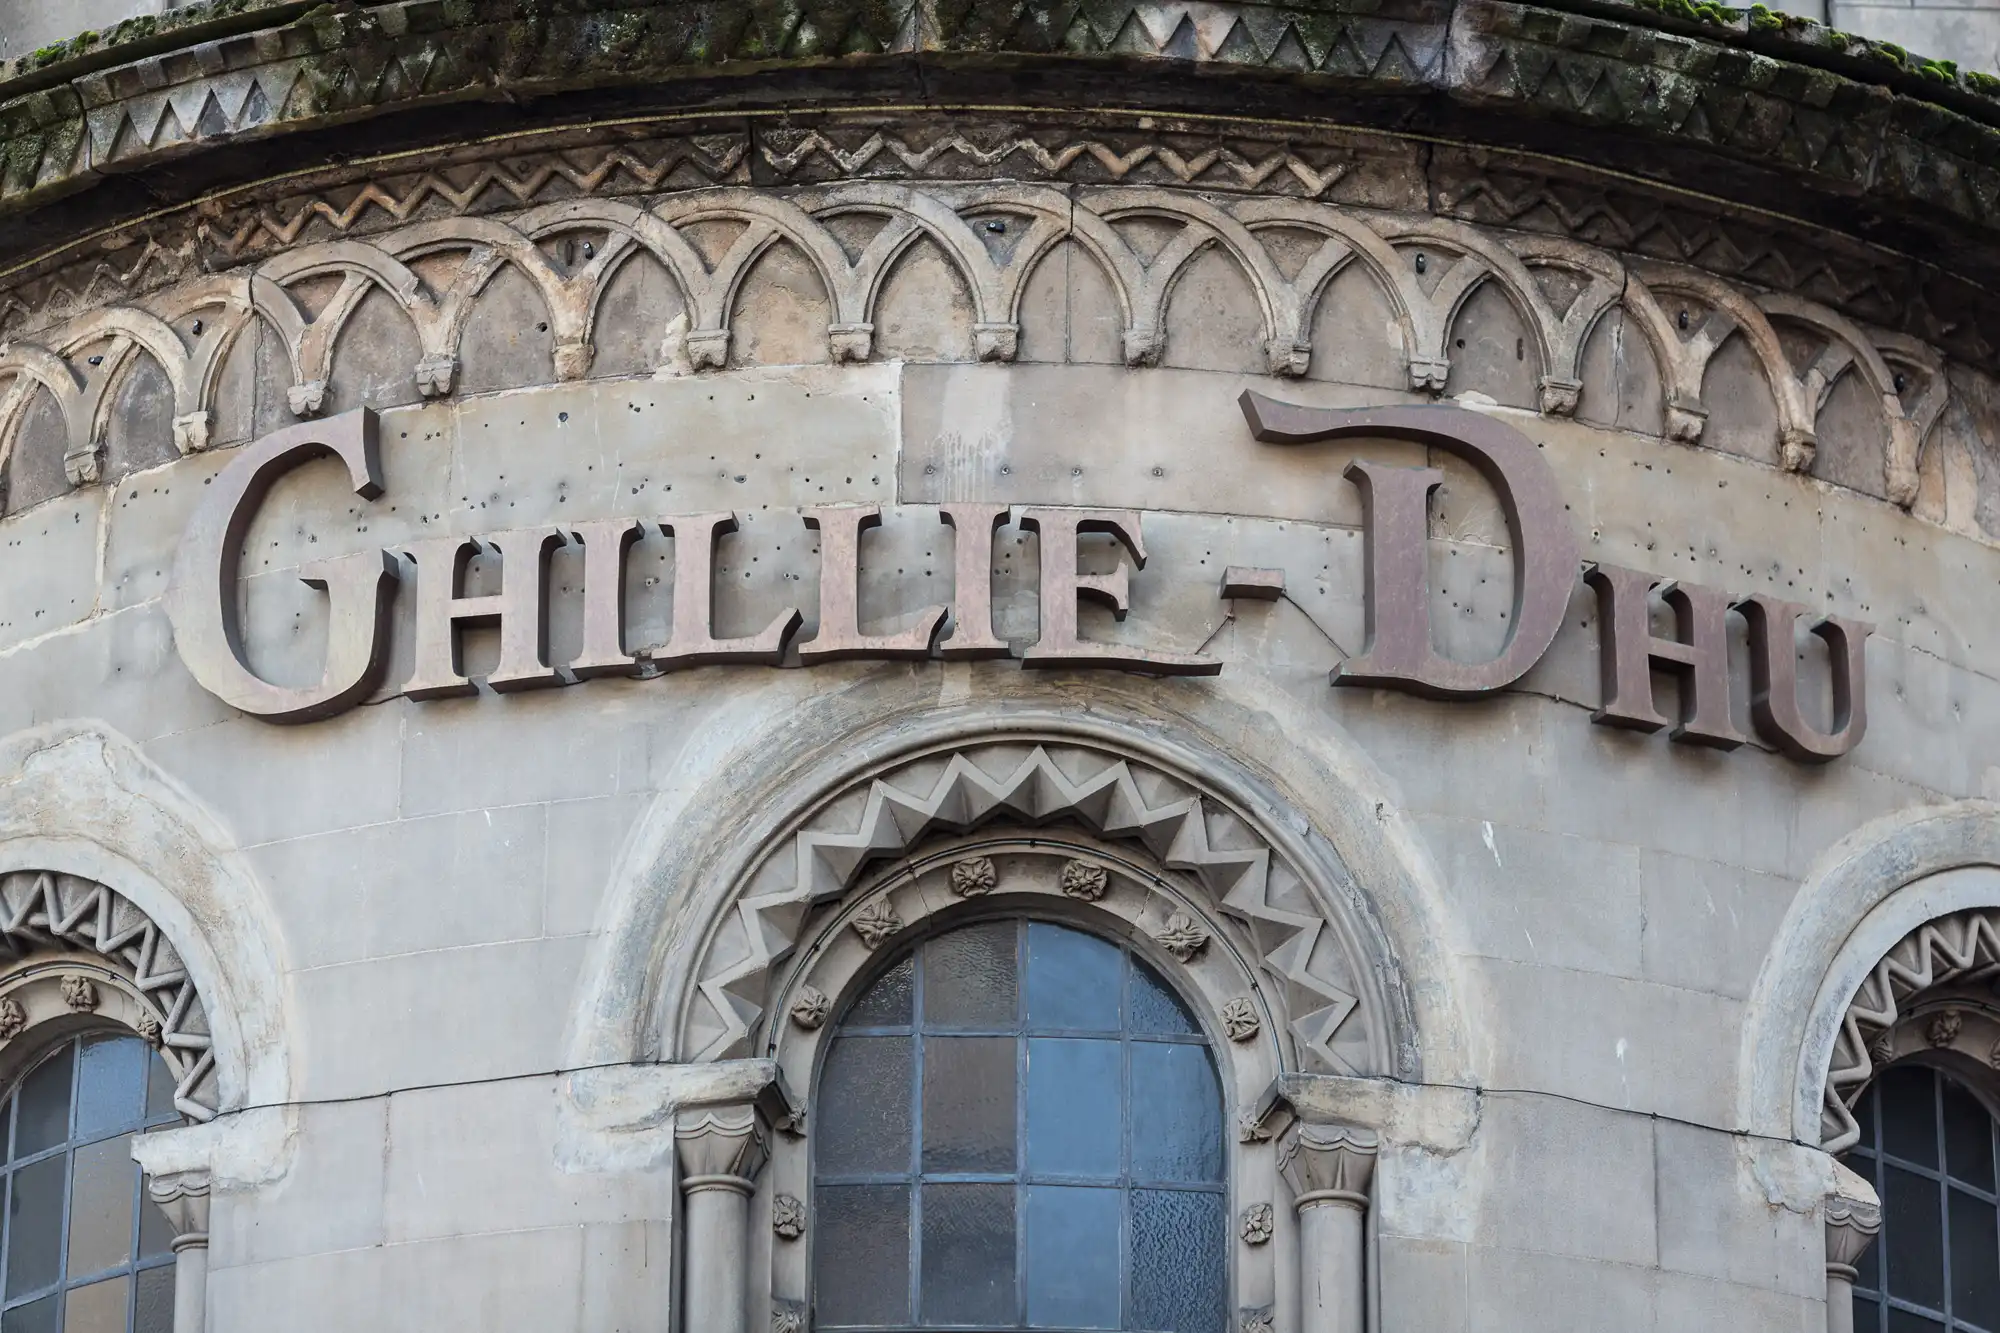 Close-up of a building's ornate facade featuring the words "chilli life dao" in a cursive, metallic script, with arches and detailed stone carvings.